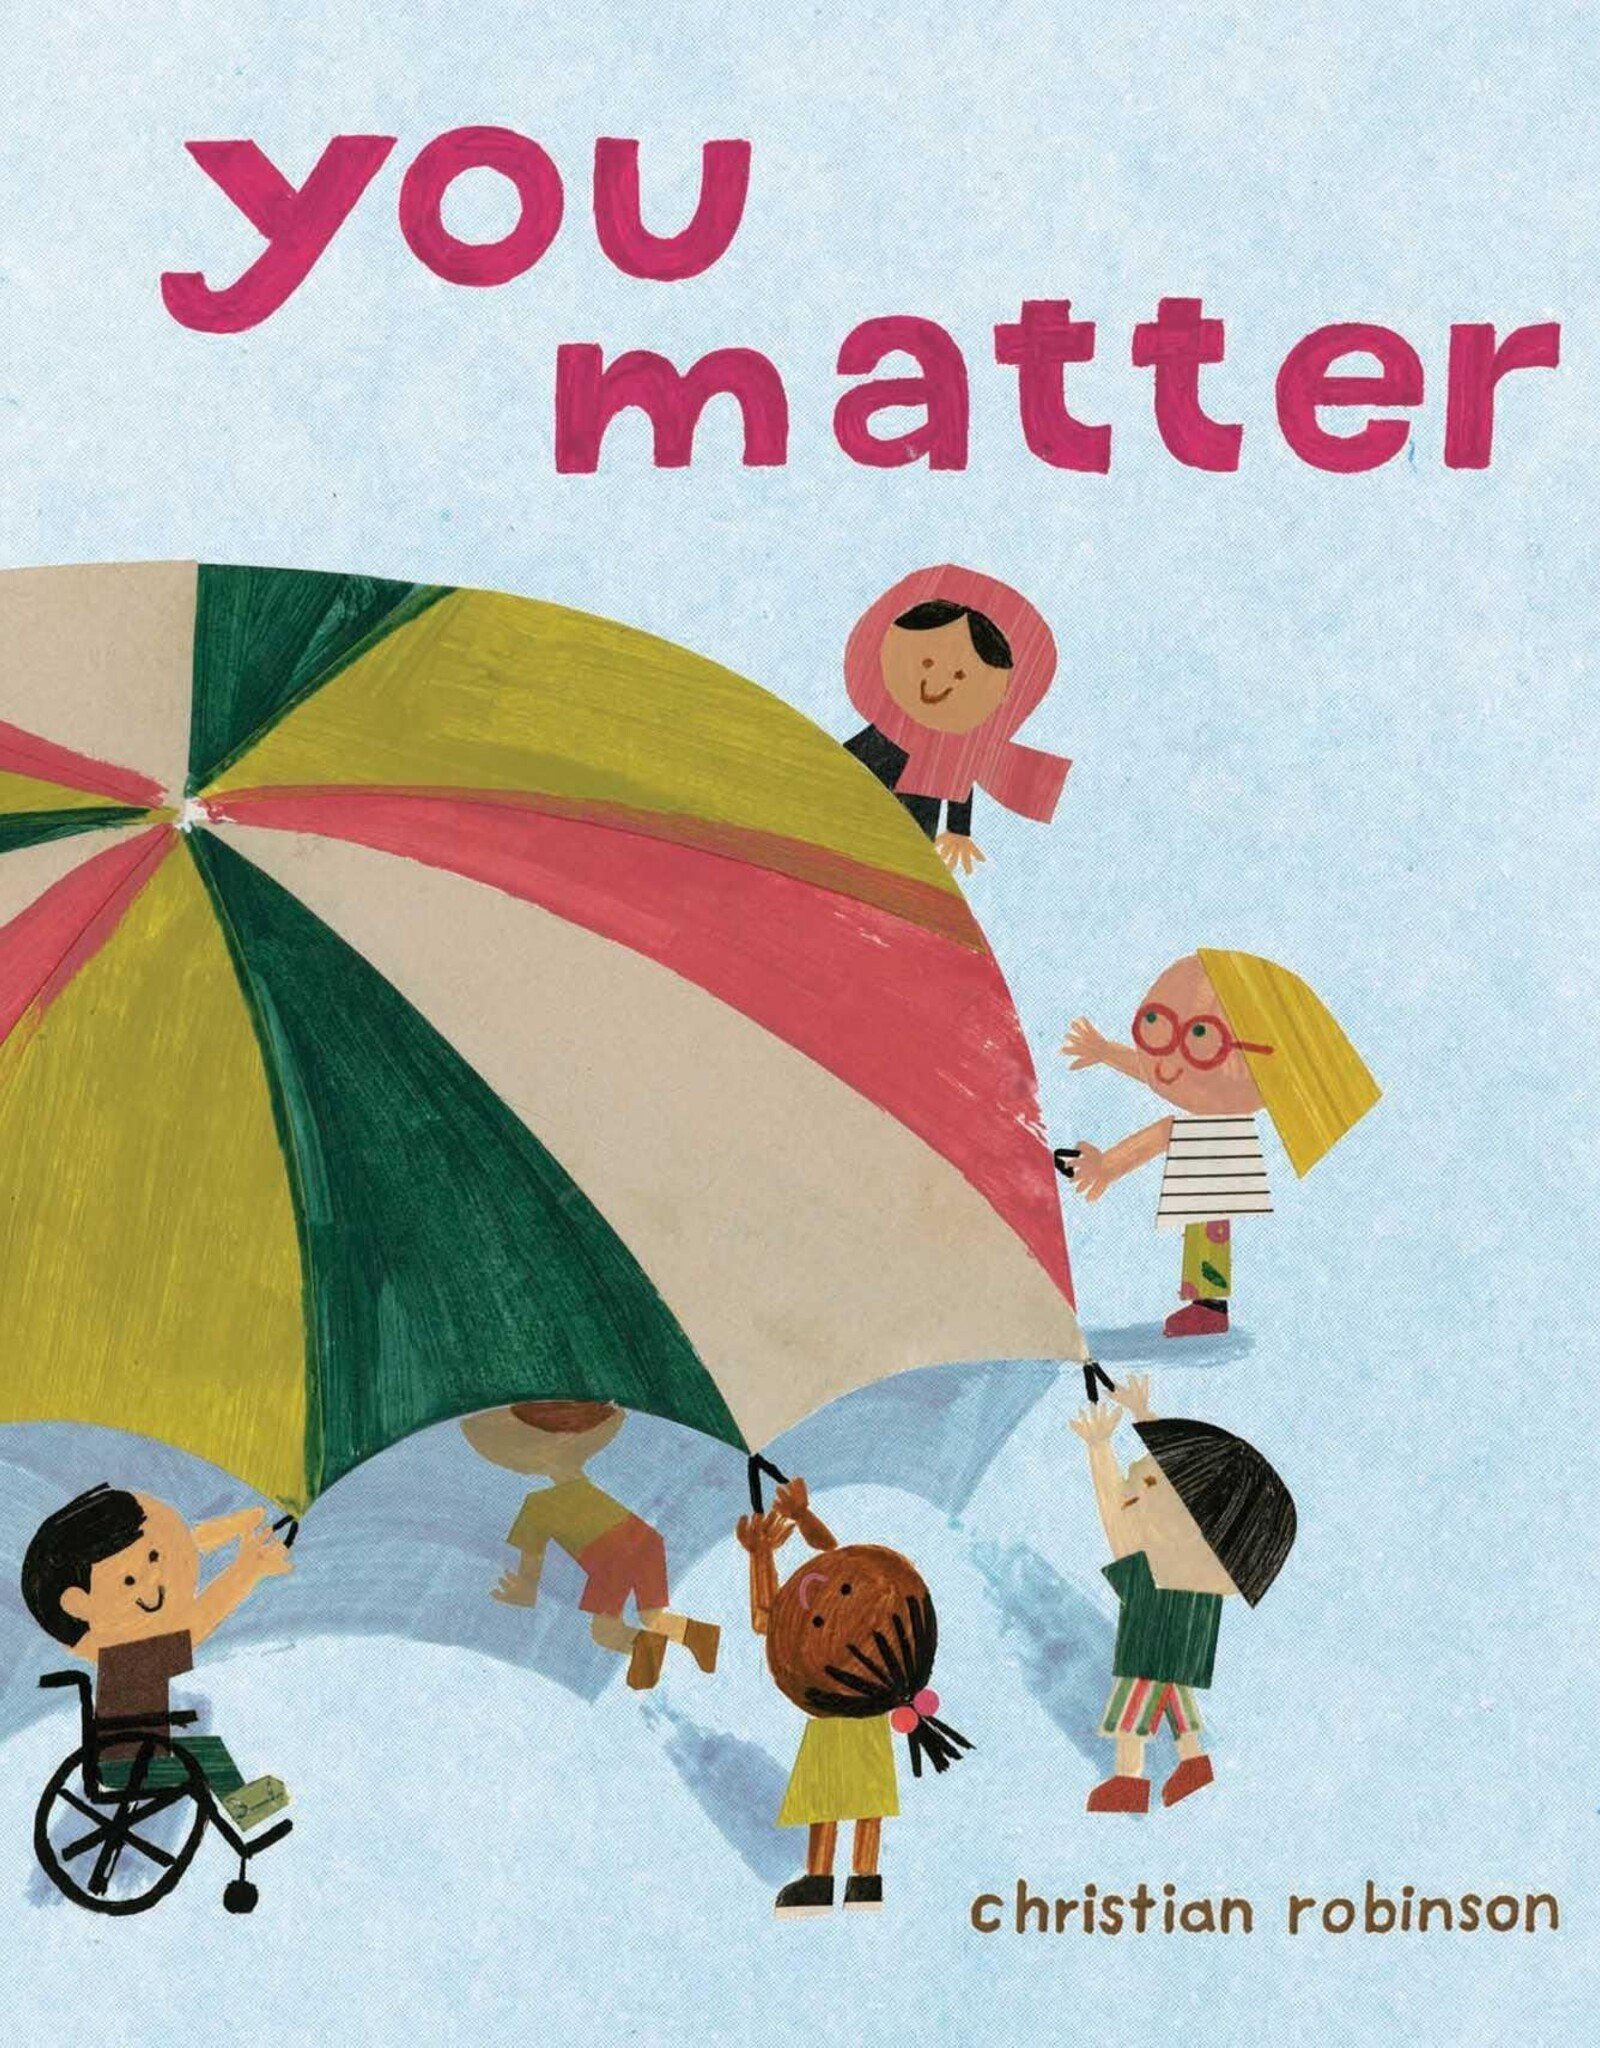 BOOK PUBLISHERS YOU MATTER